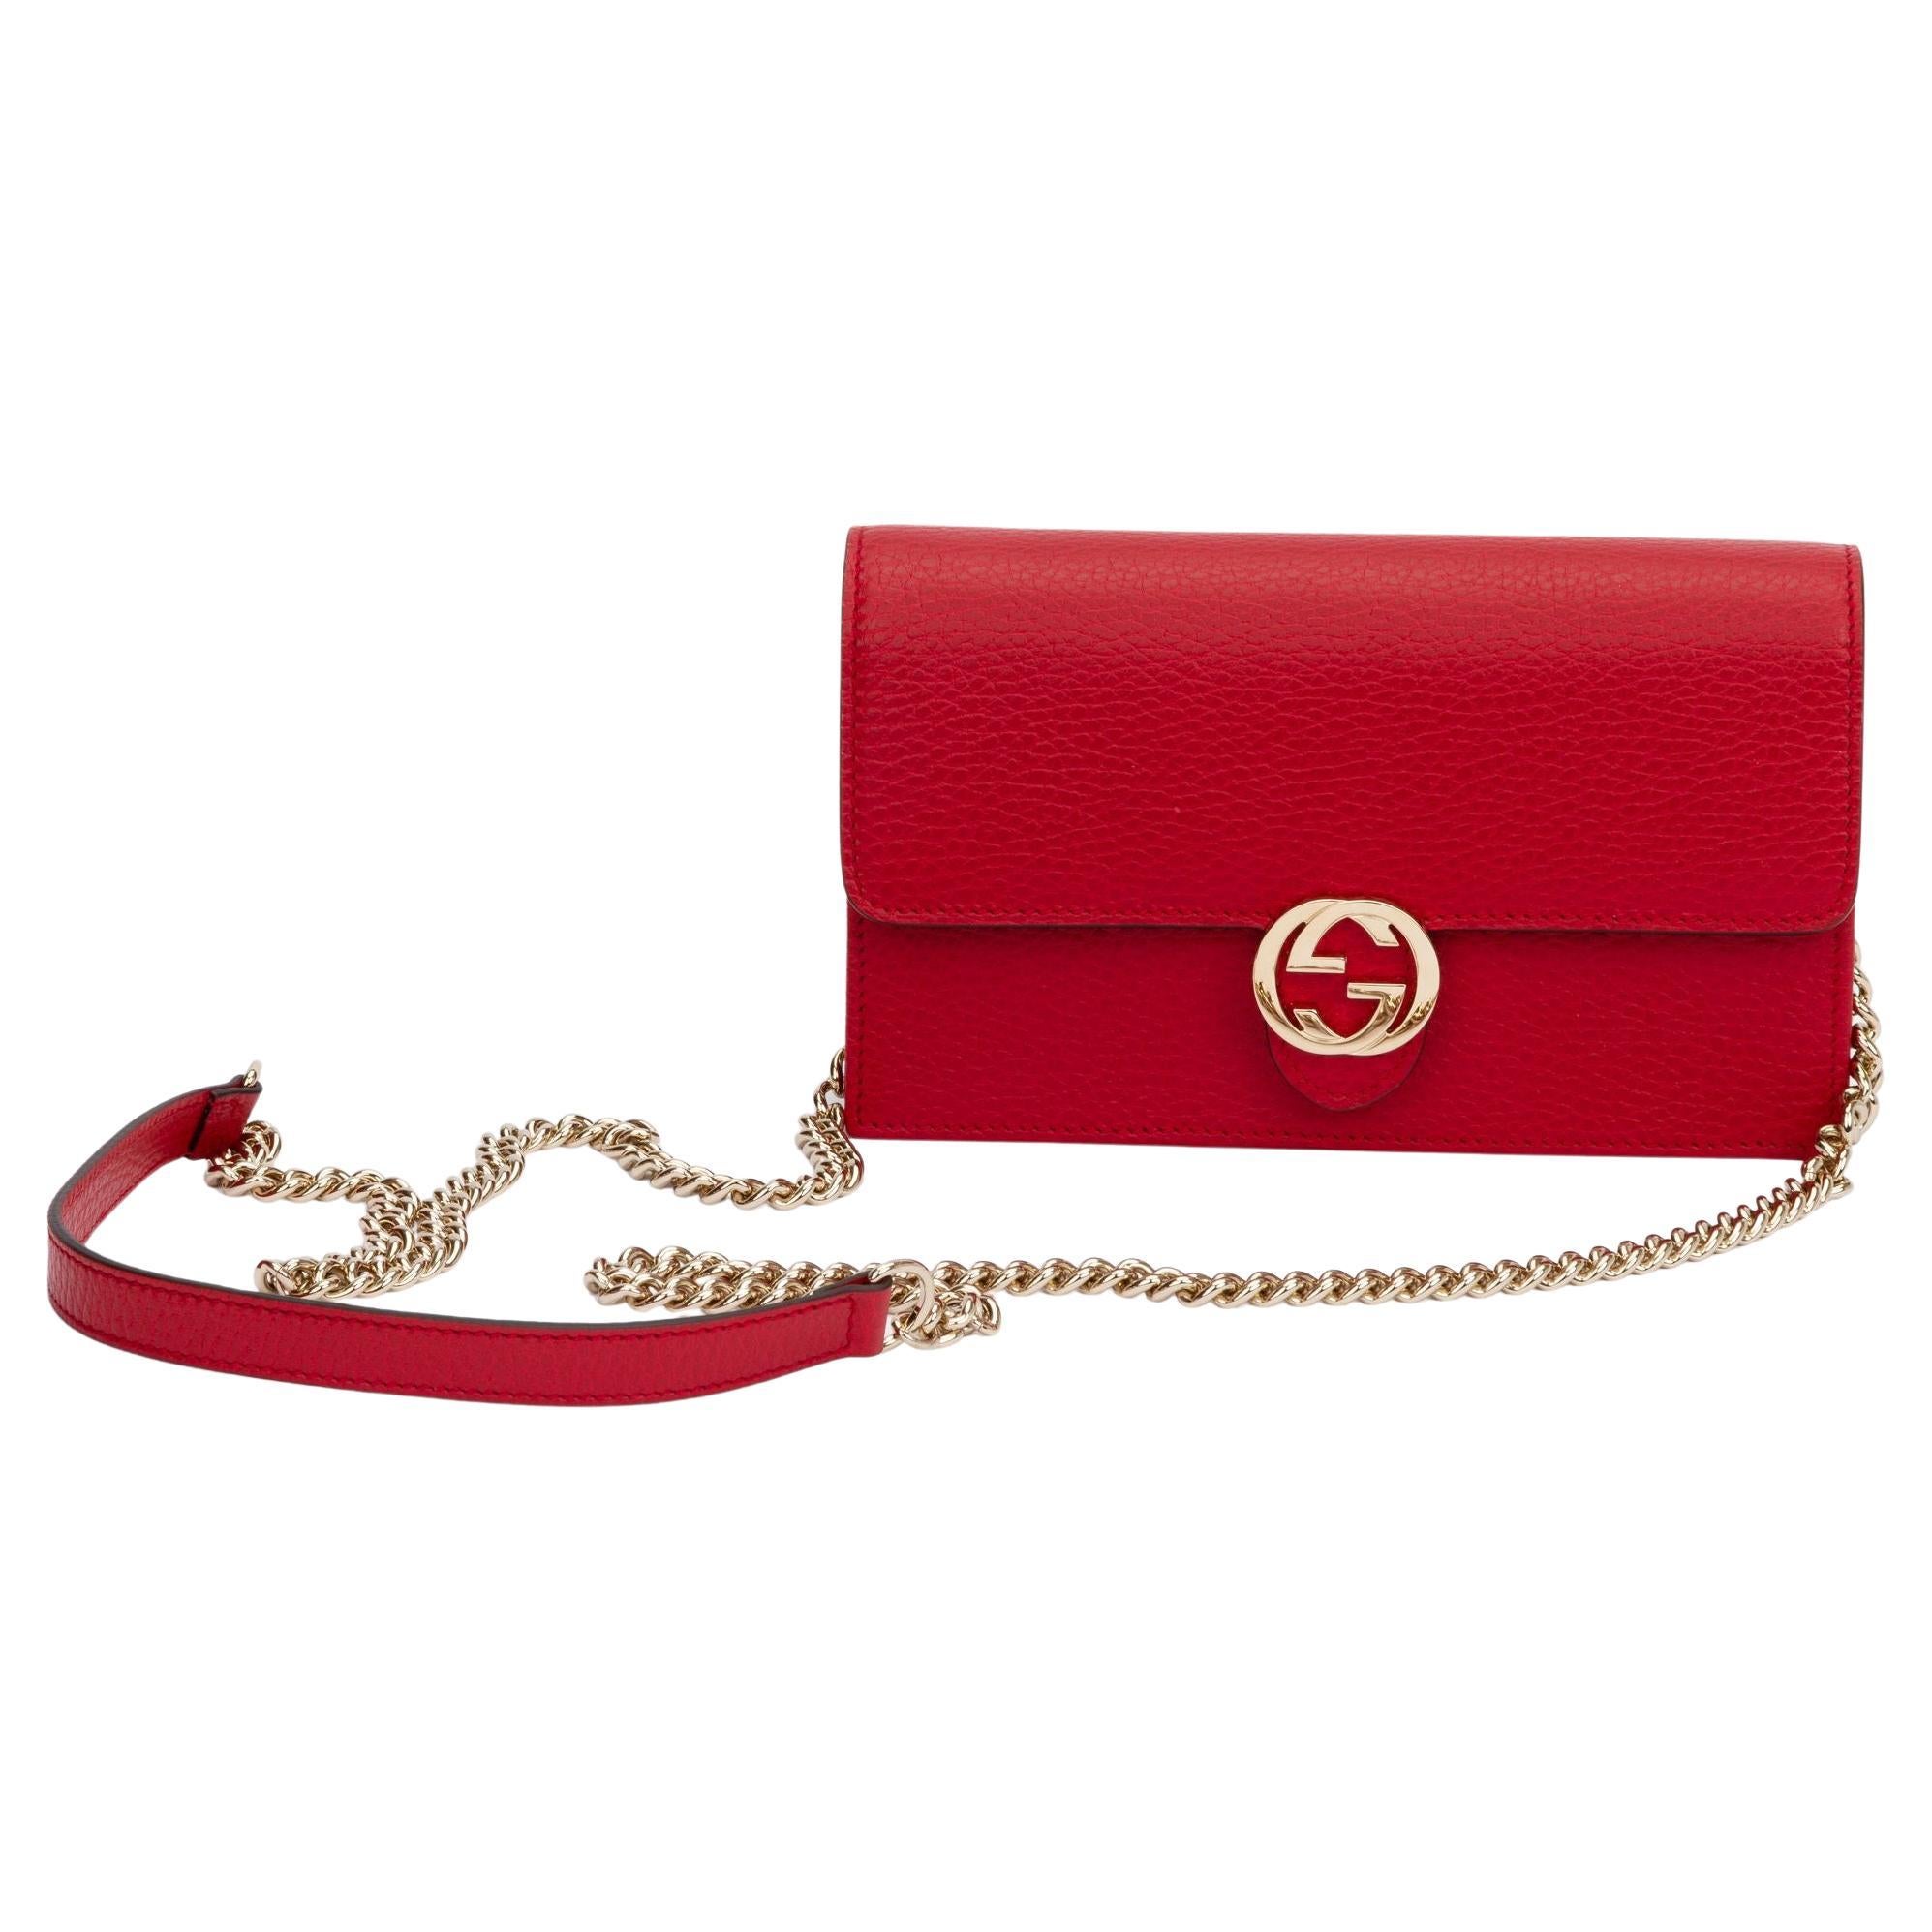 Gucci NIB Red Leather Cross Body Bag For Sale